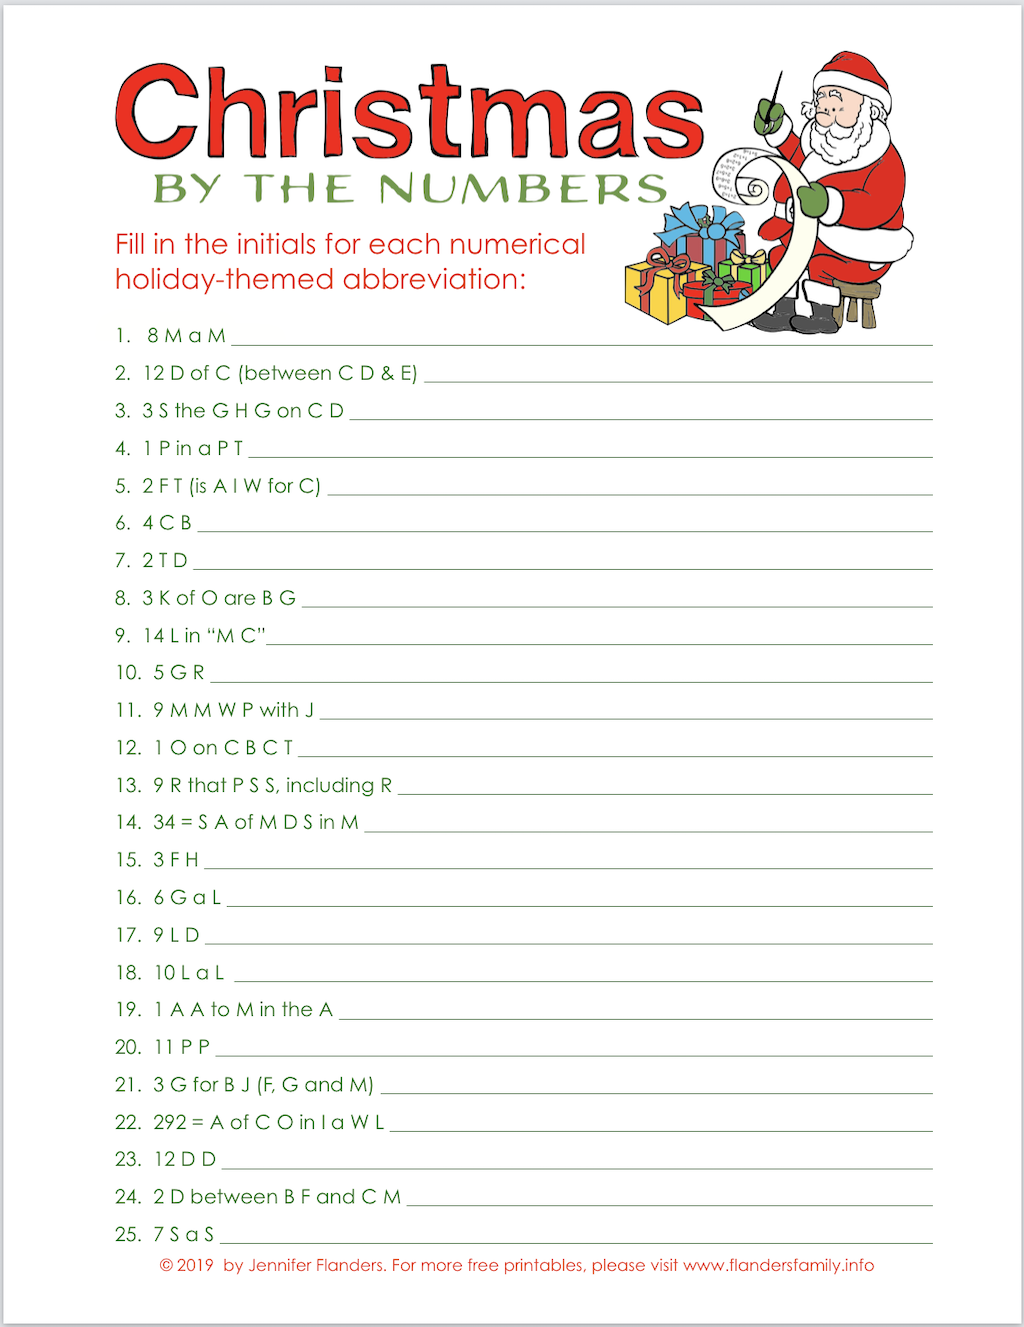 Christmas By the Numbers - Color